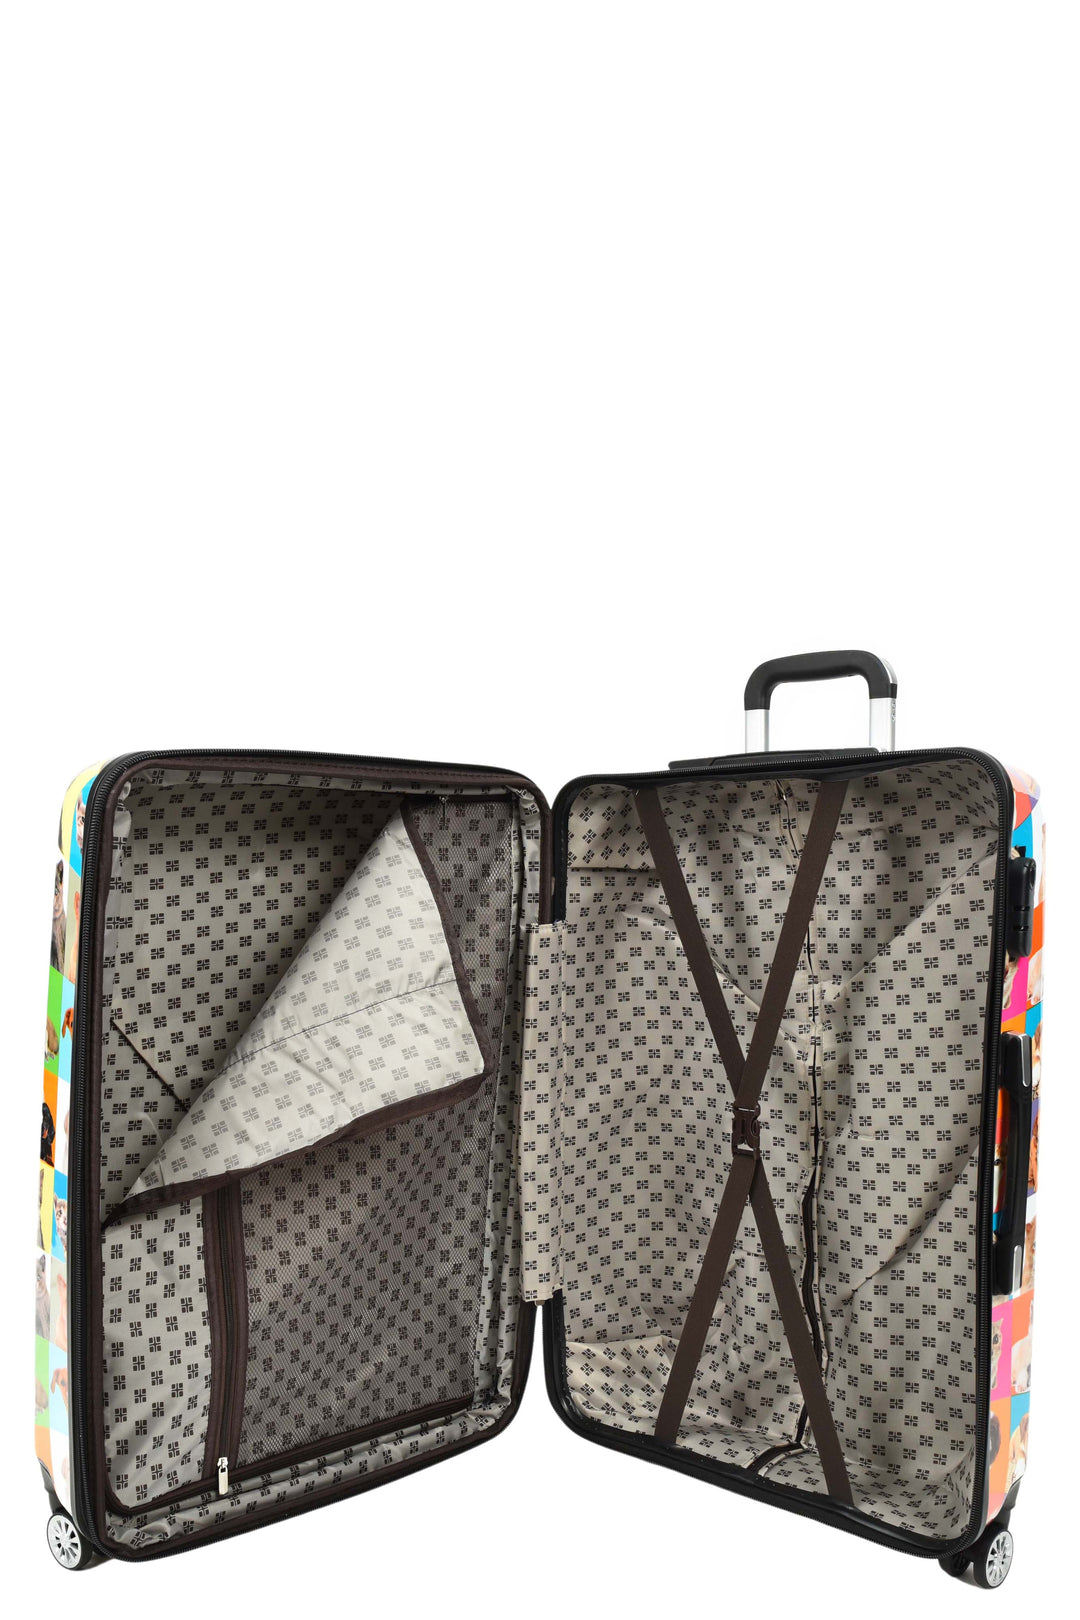 Cats and Dogs Hard Shell Suitcase 5